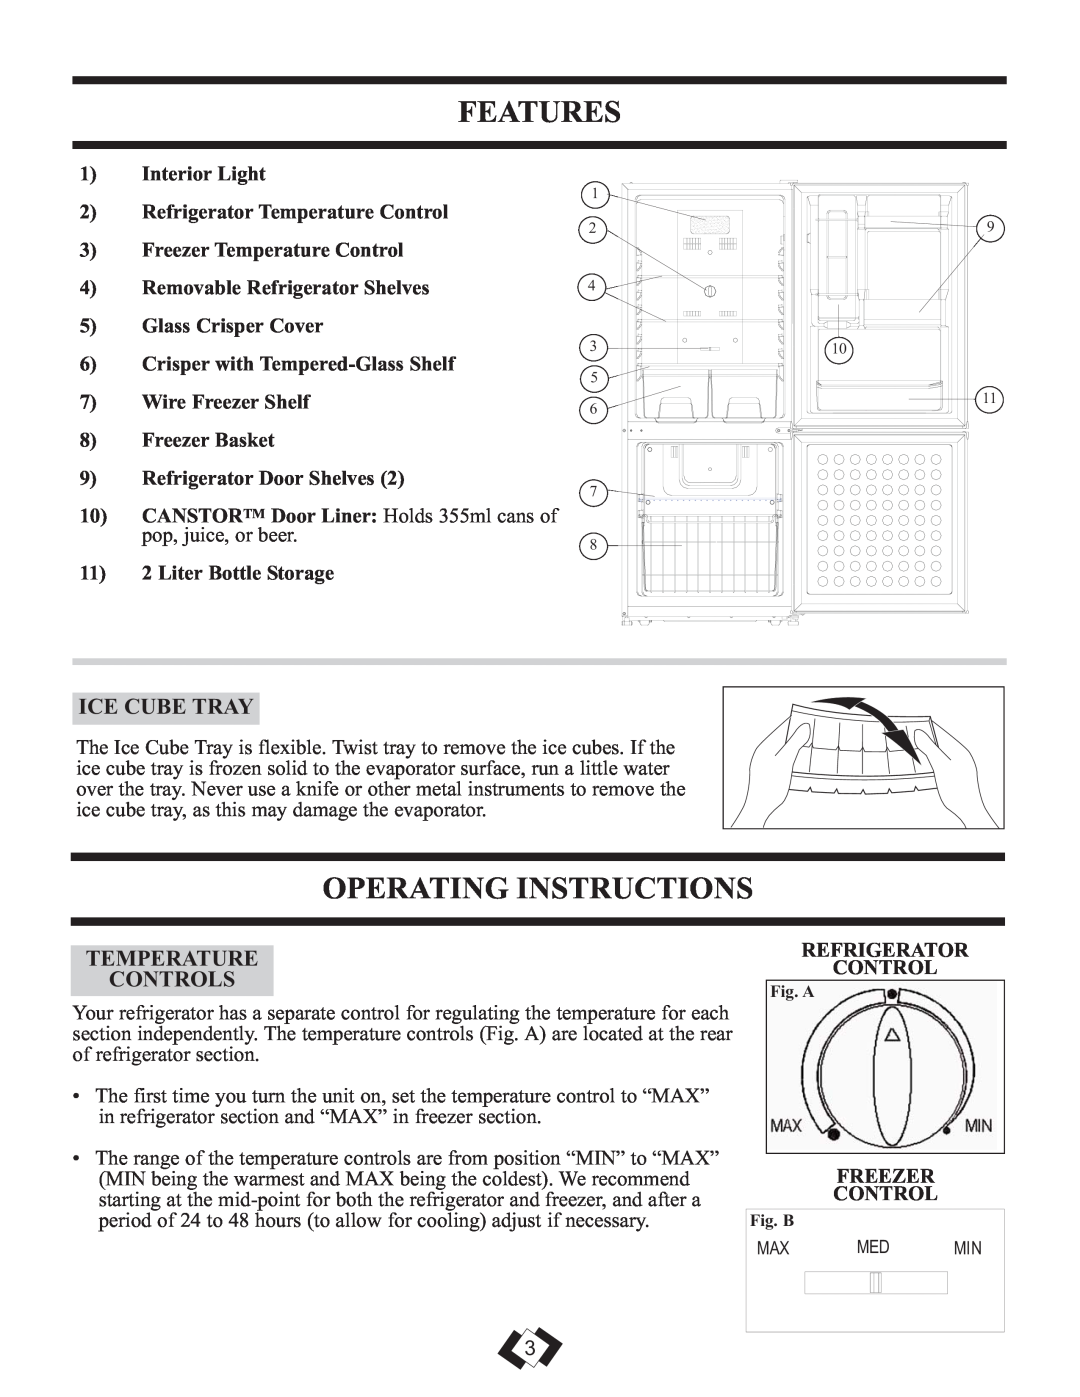 Danby DFF261WDB installation instructions Features, Operating Instructions, Ice Cube Tray, Temperature Controls 